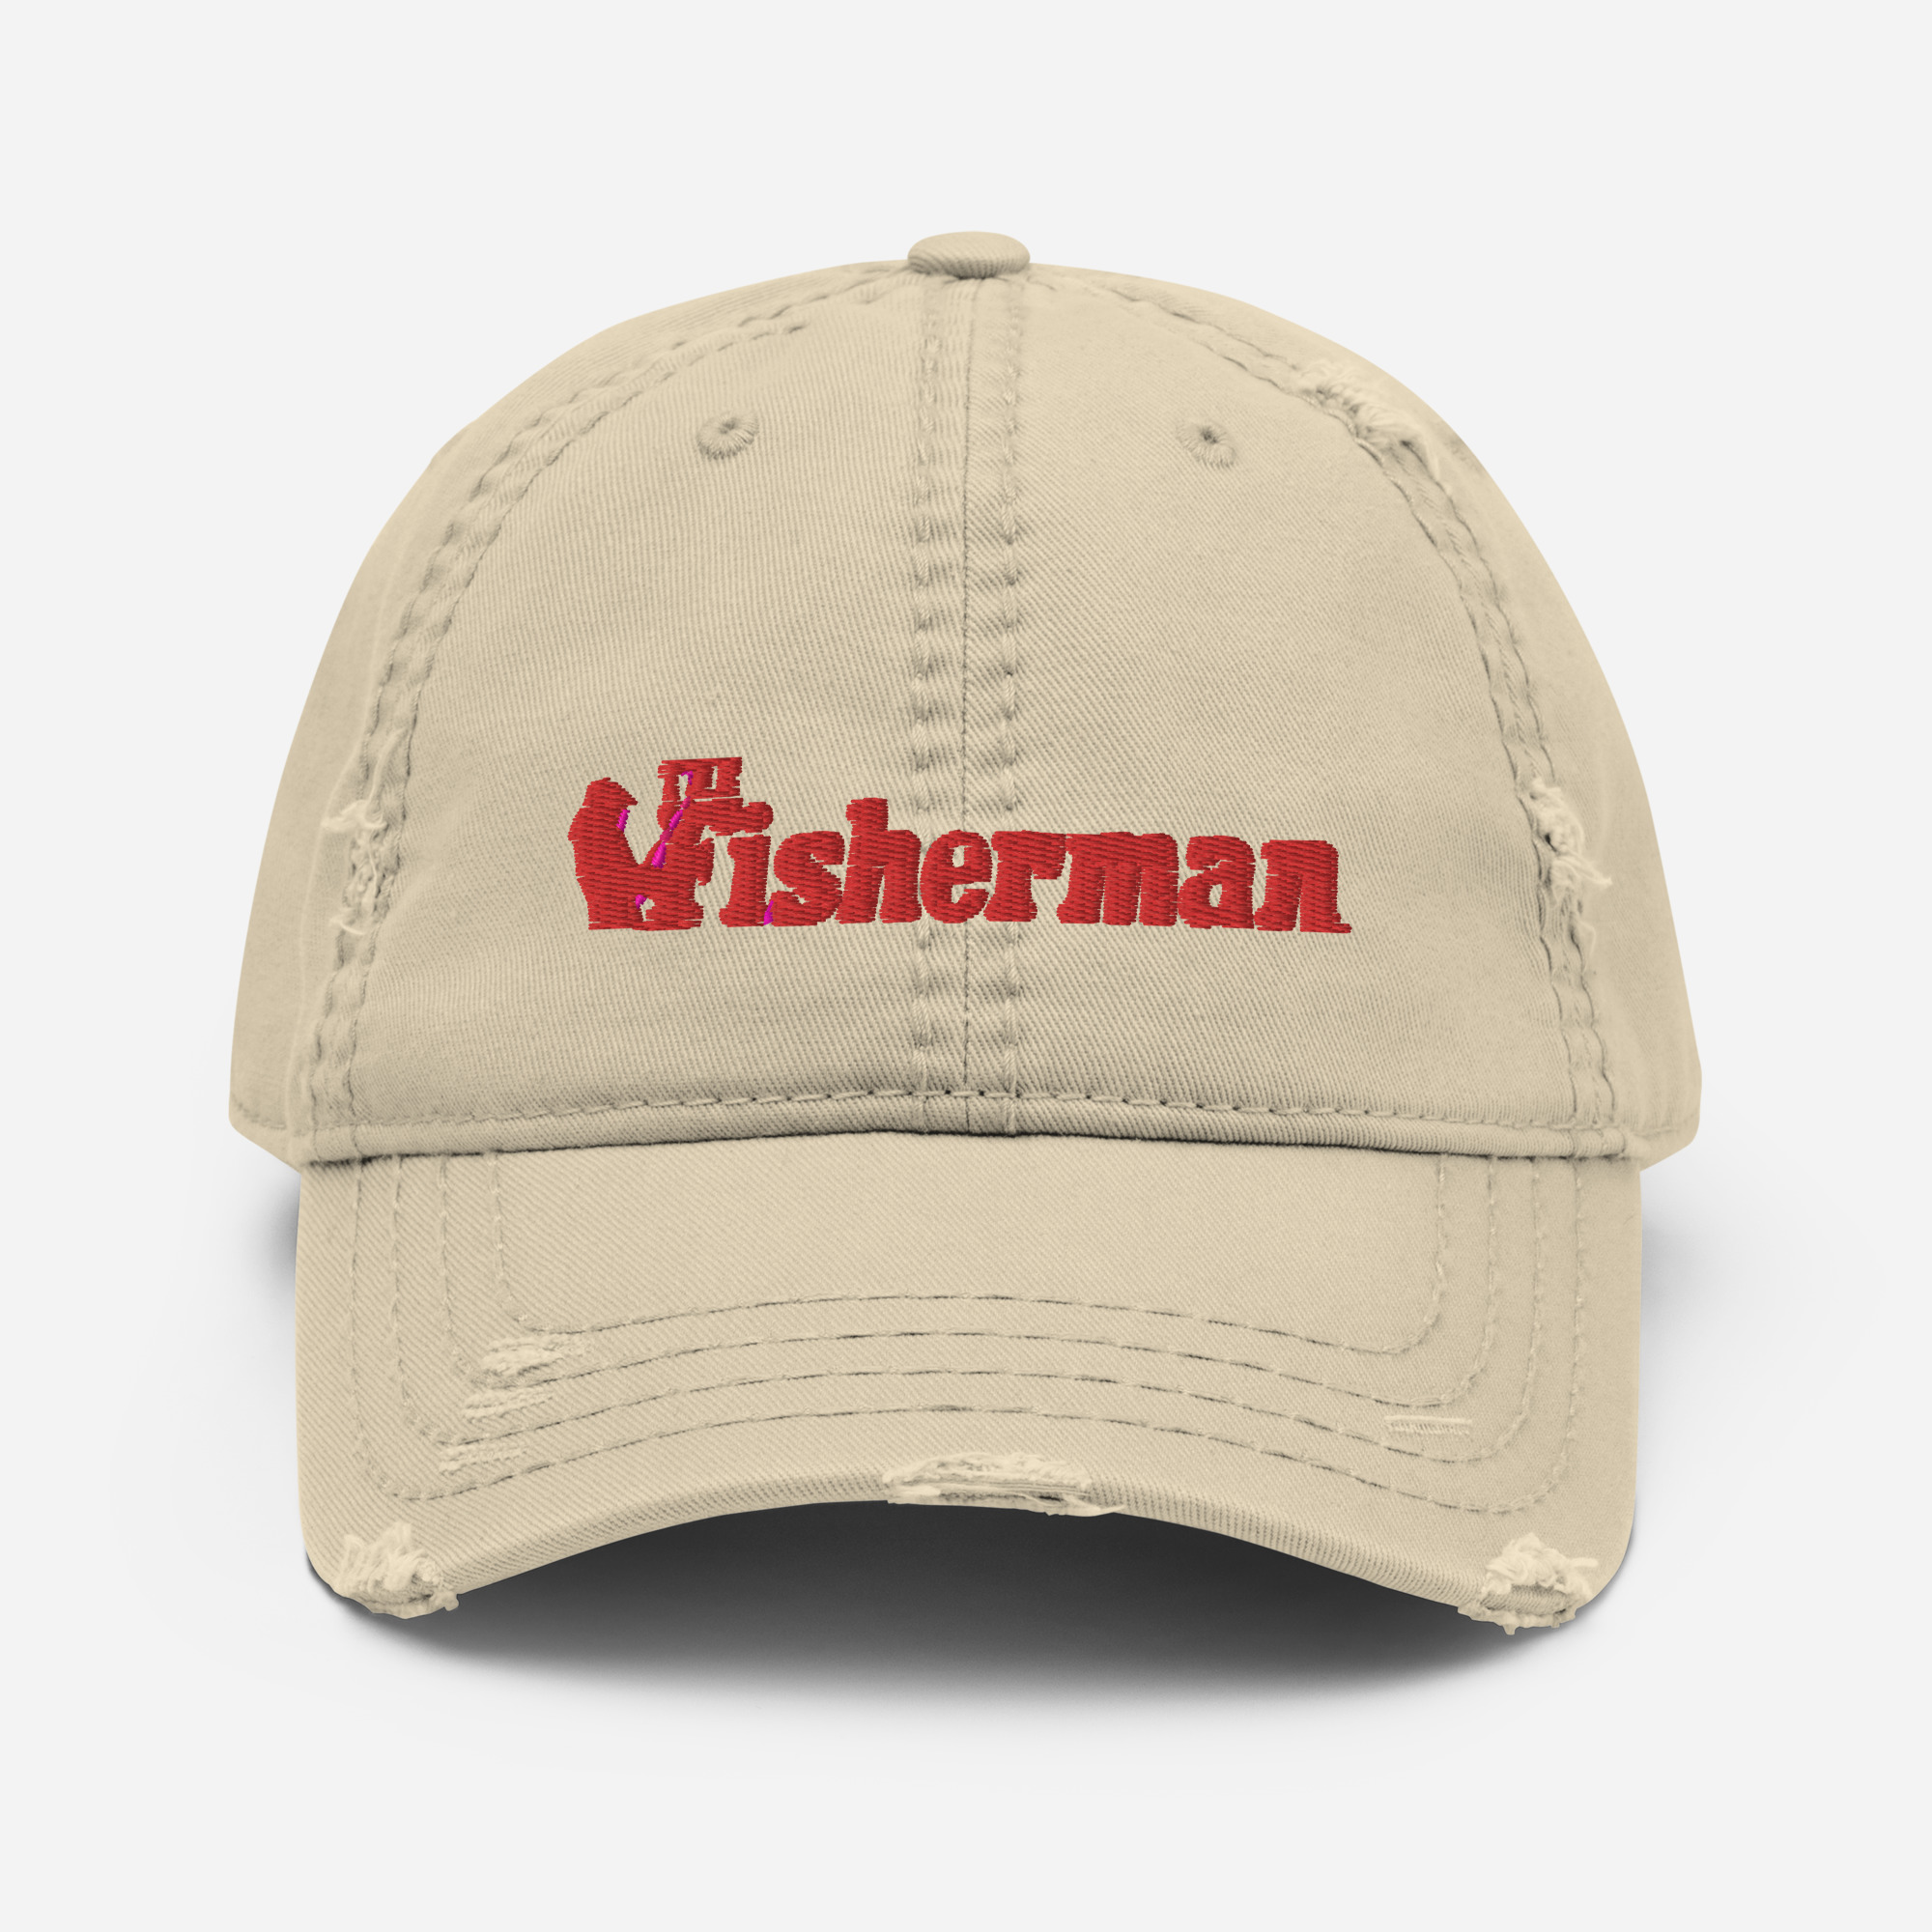 Distressed Dad Hat - The Fisherman